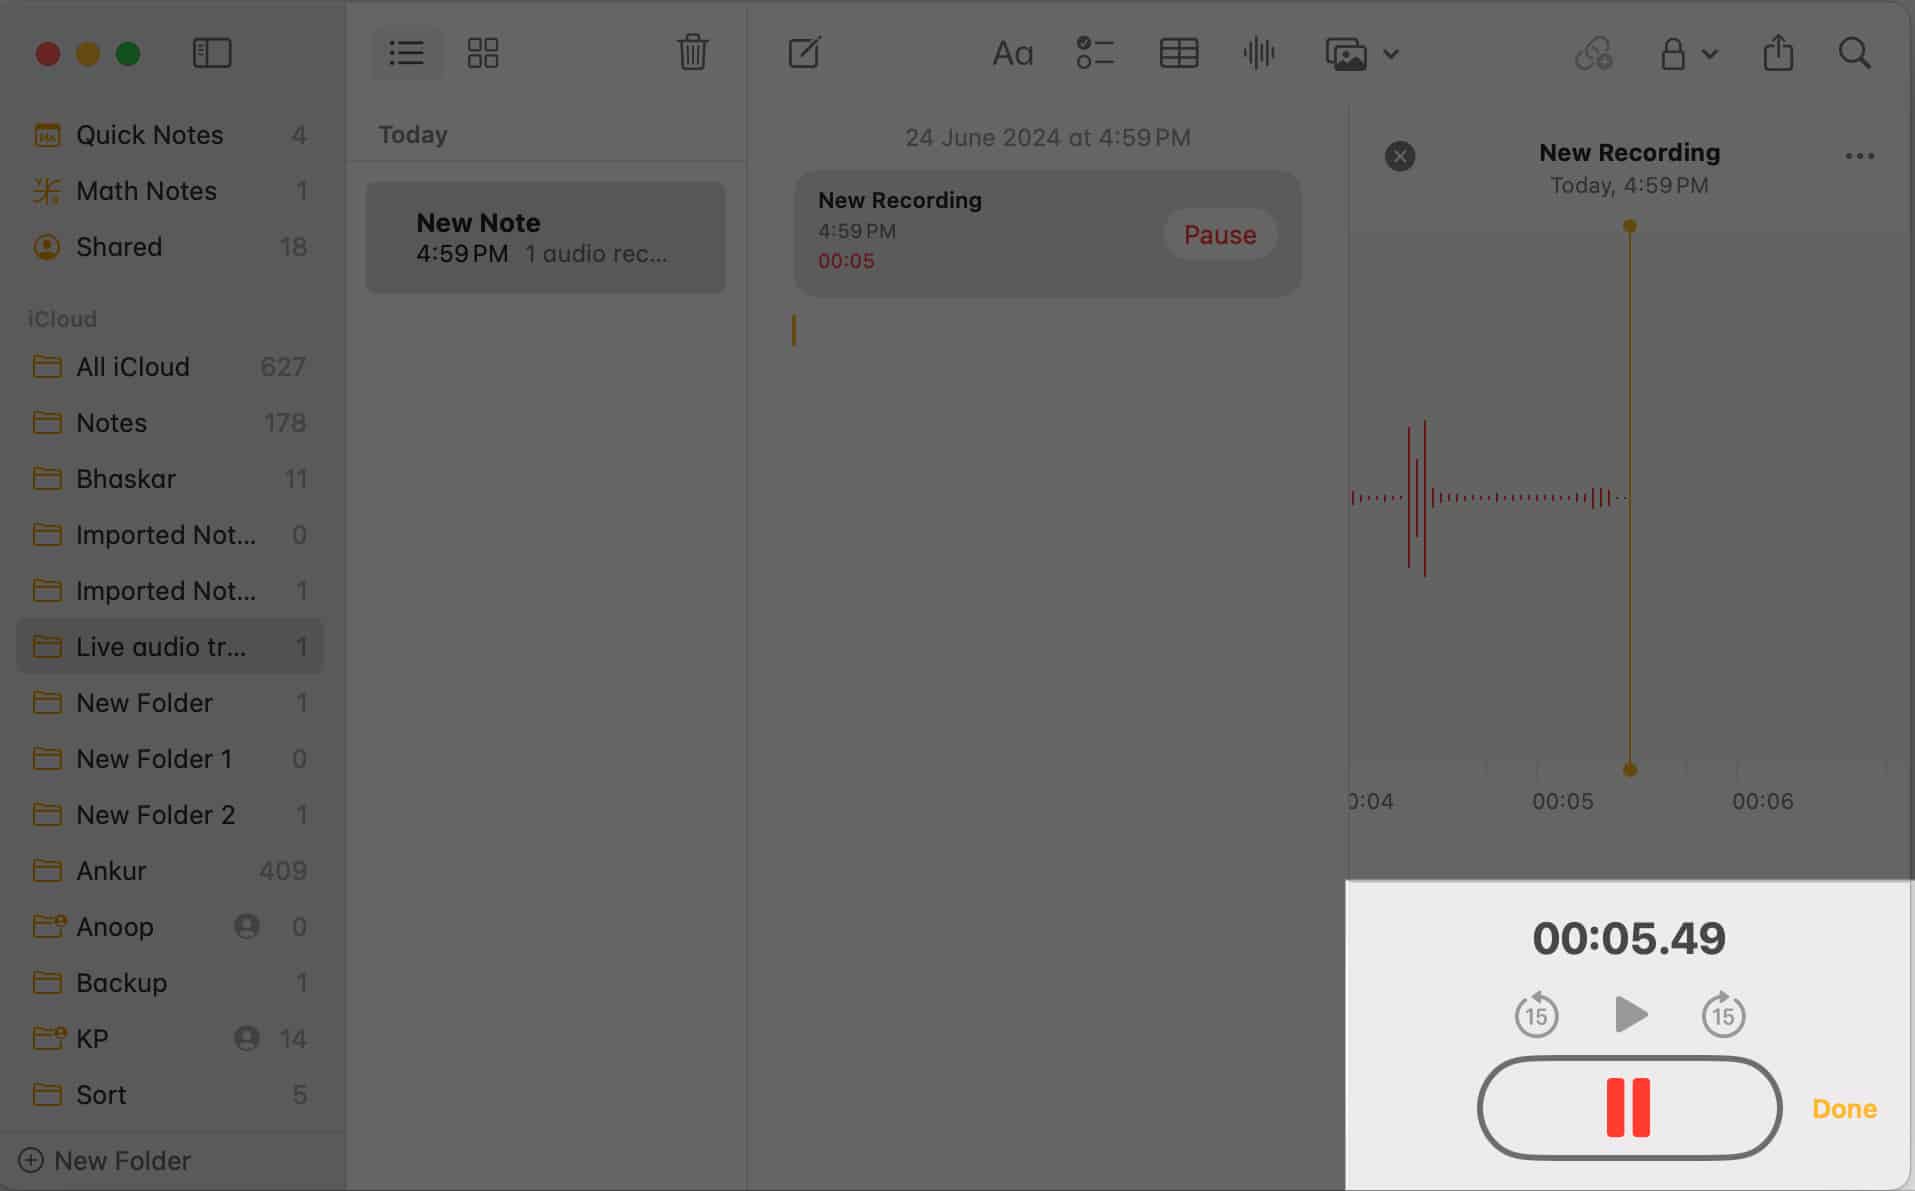 Pause or tap done to save live audio recording in Notes app on Mac